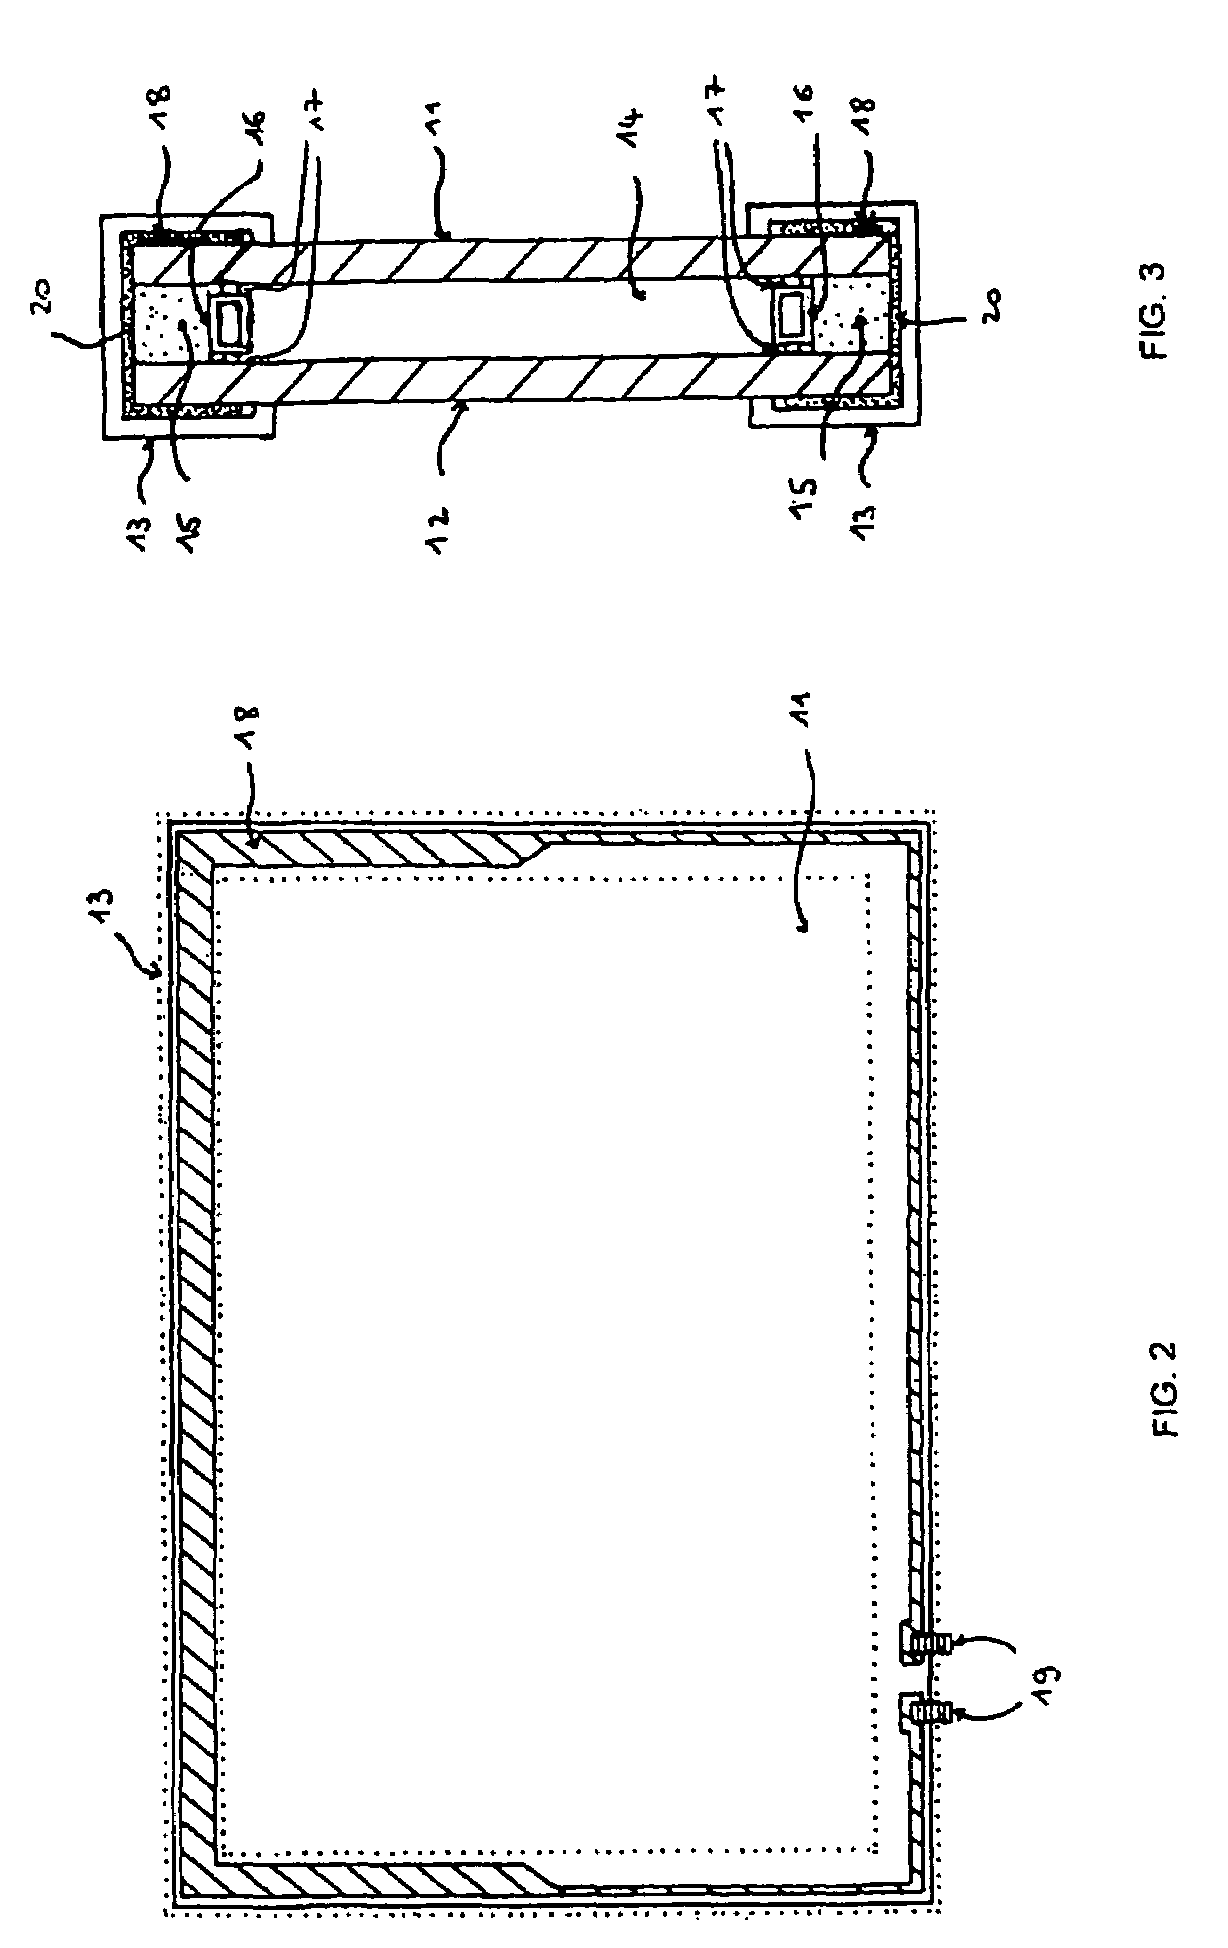 Insulating glass element, especially for a refrigerated enclosure